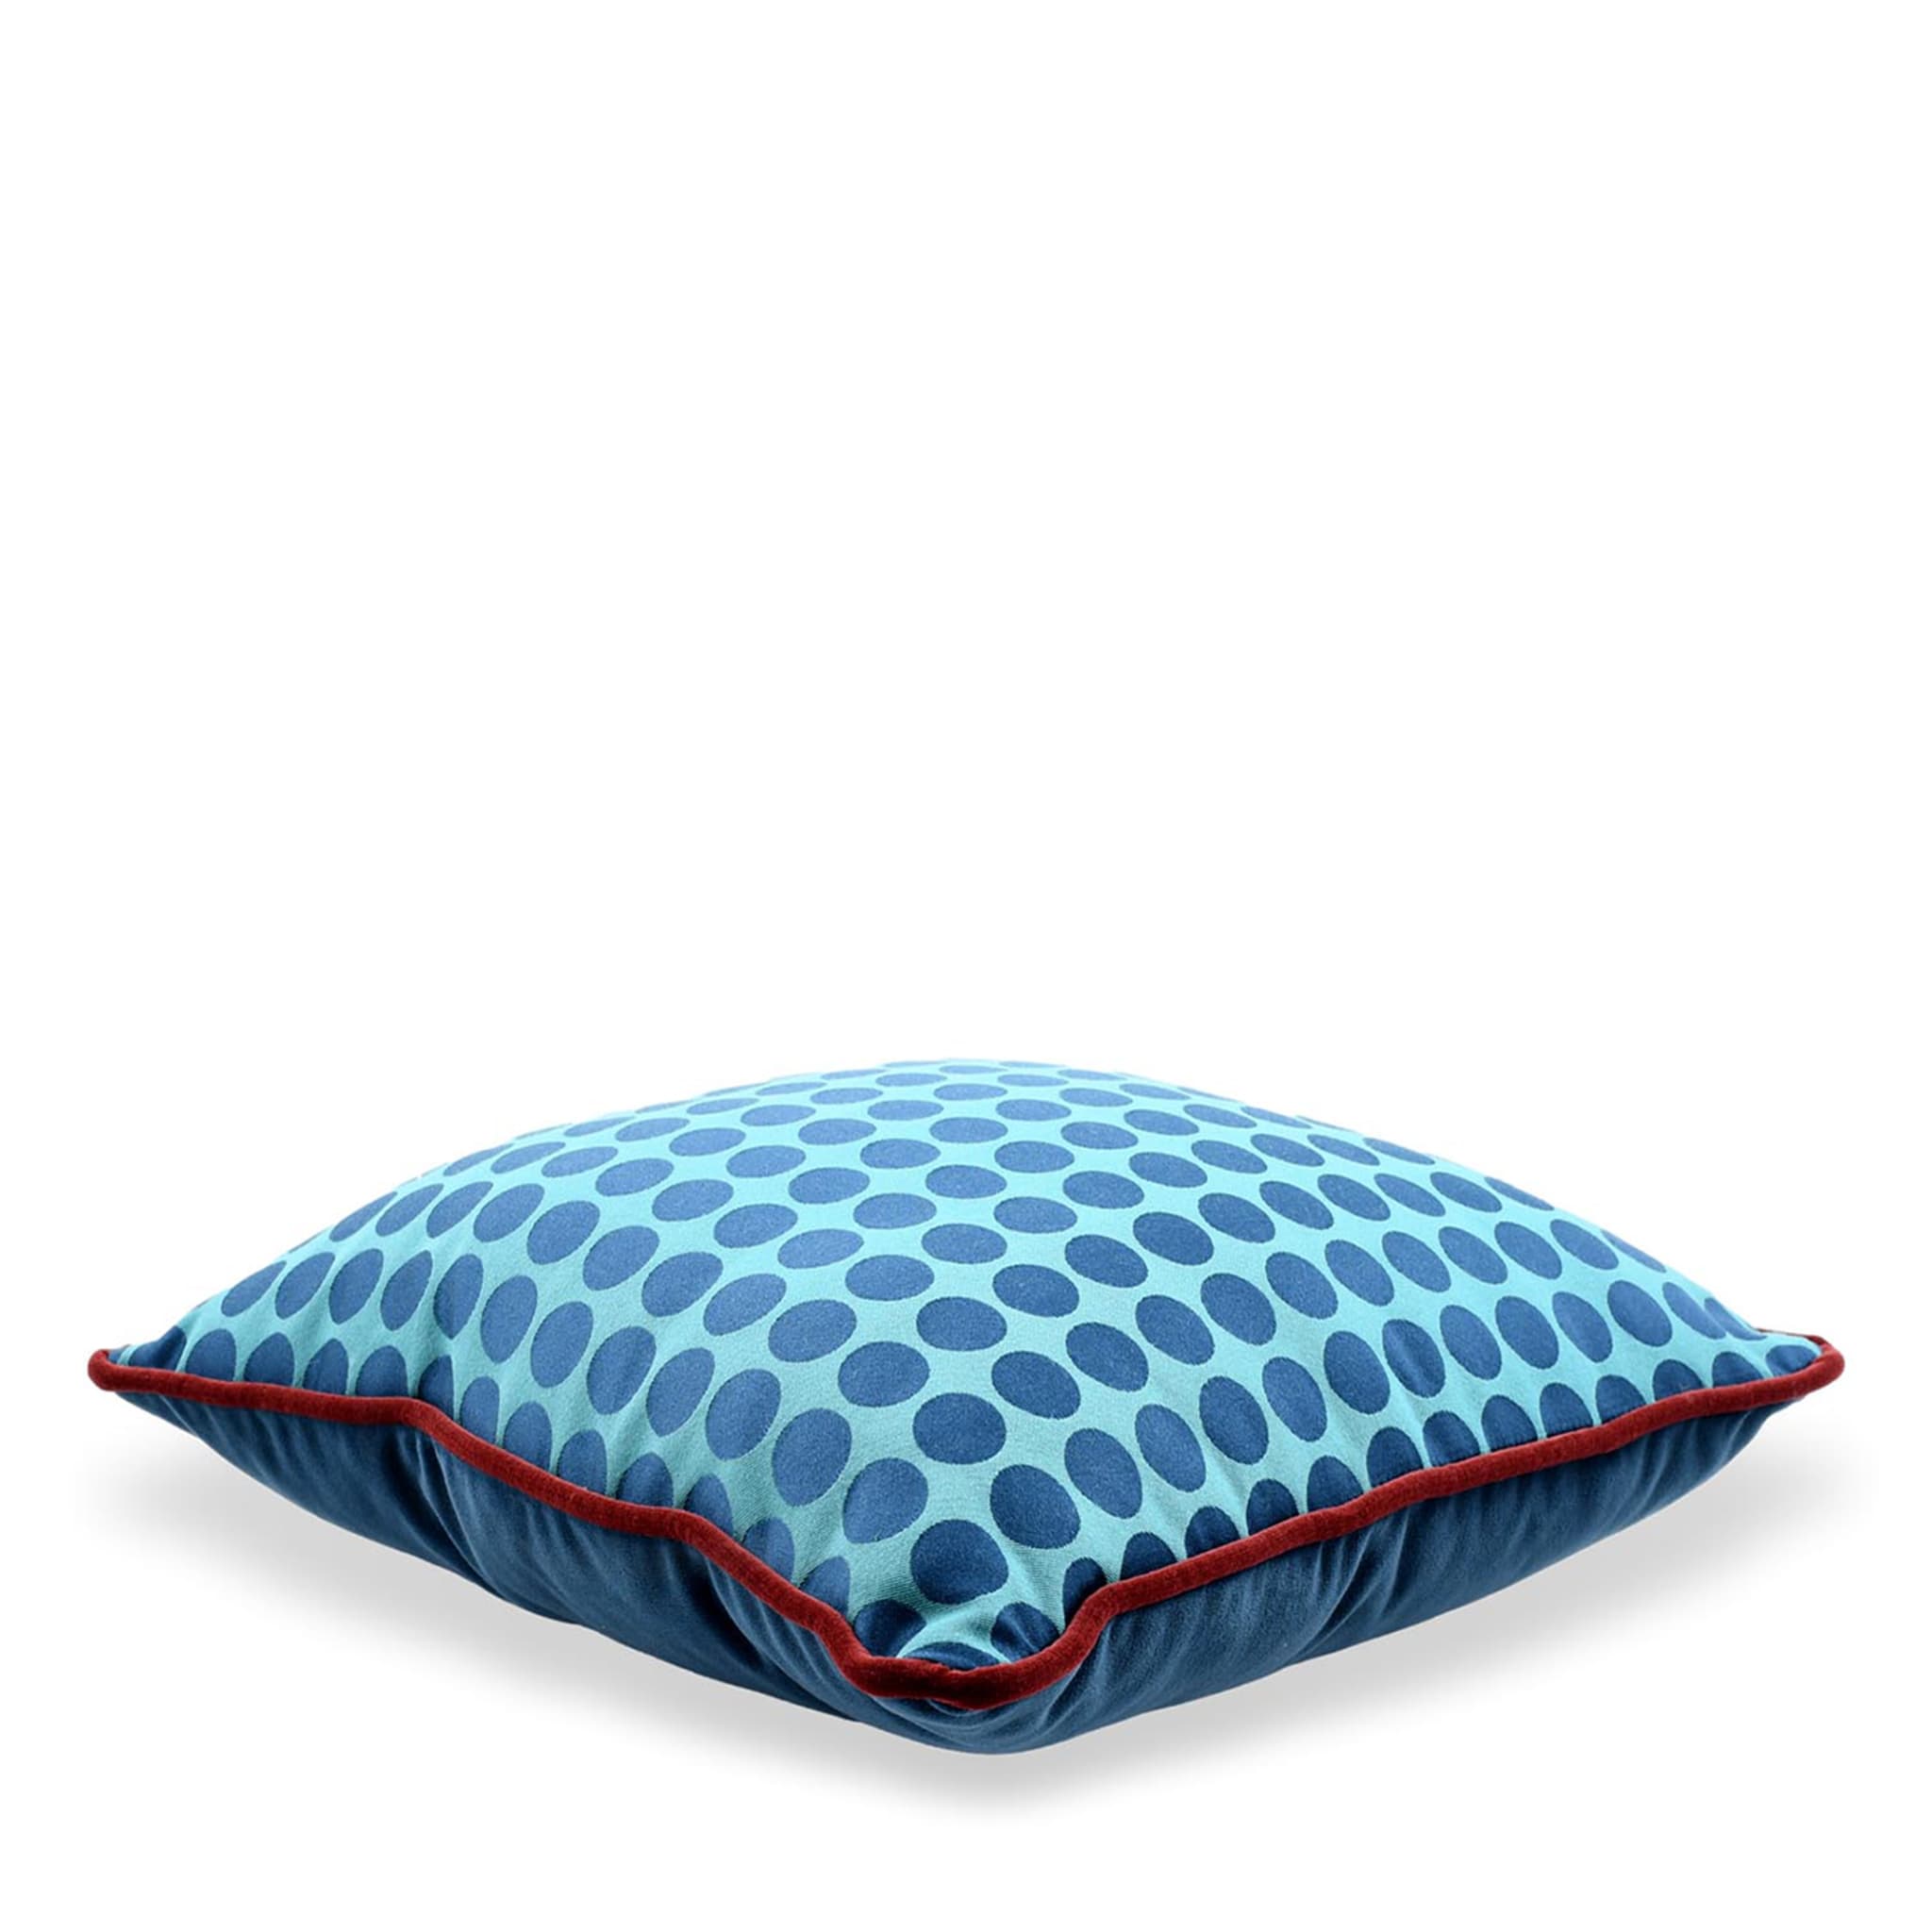 Turquoise and Blue Carrè Cushion in polka dots jacquard fabric - Alternative view 2